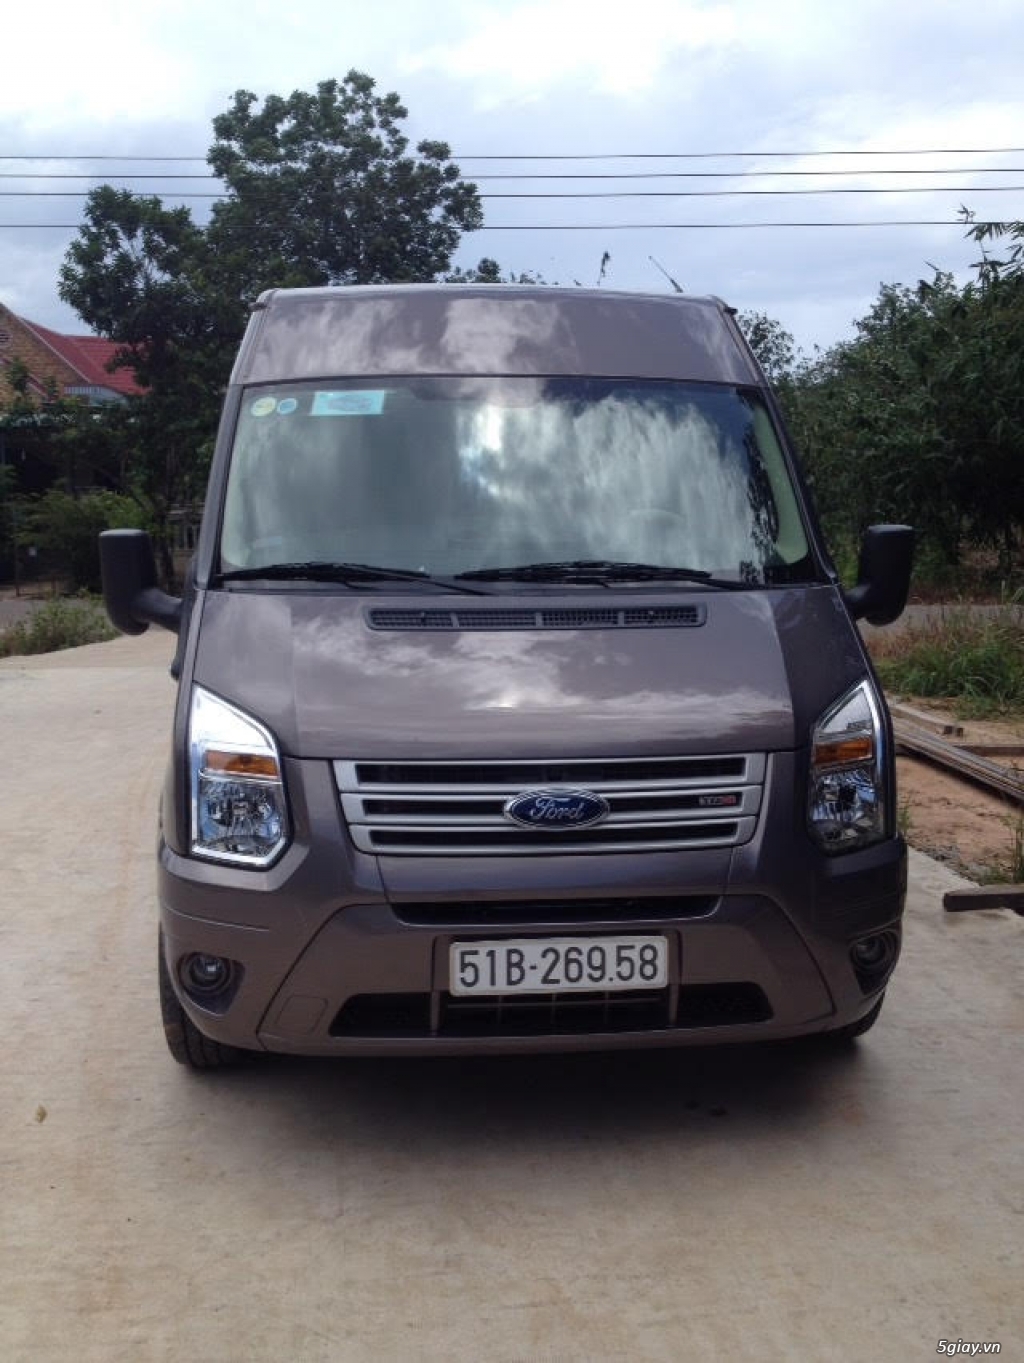 Private taxi transfers from Muine to Nha Trang Vietnam